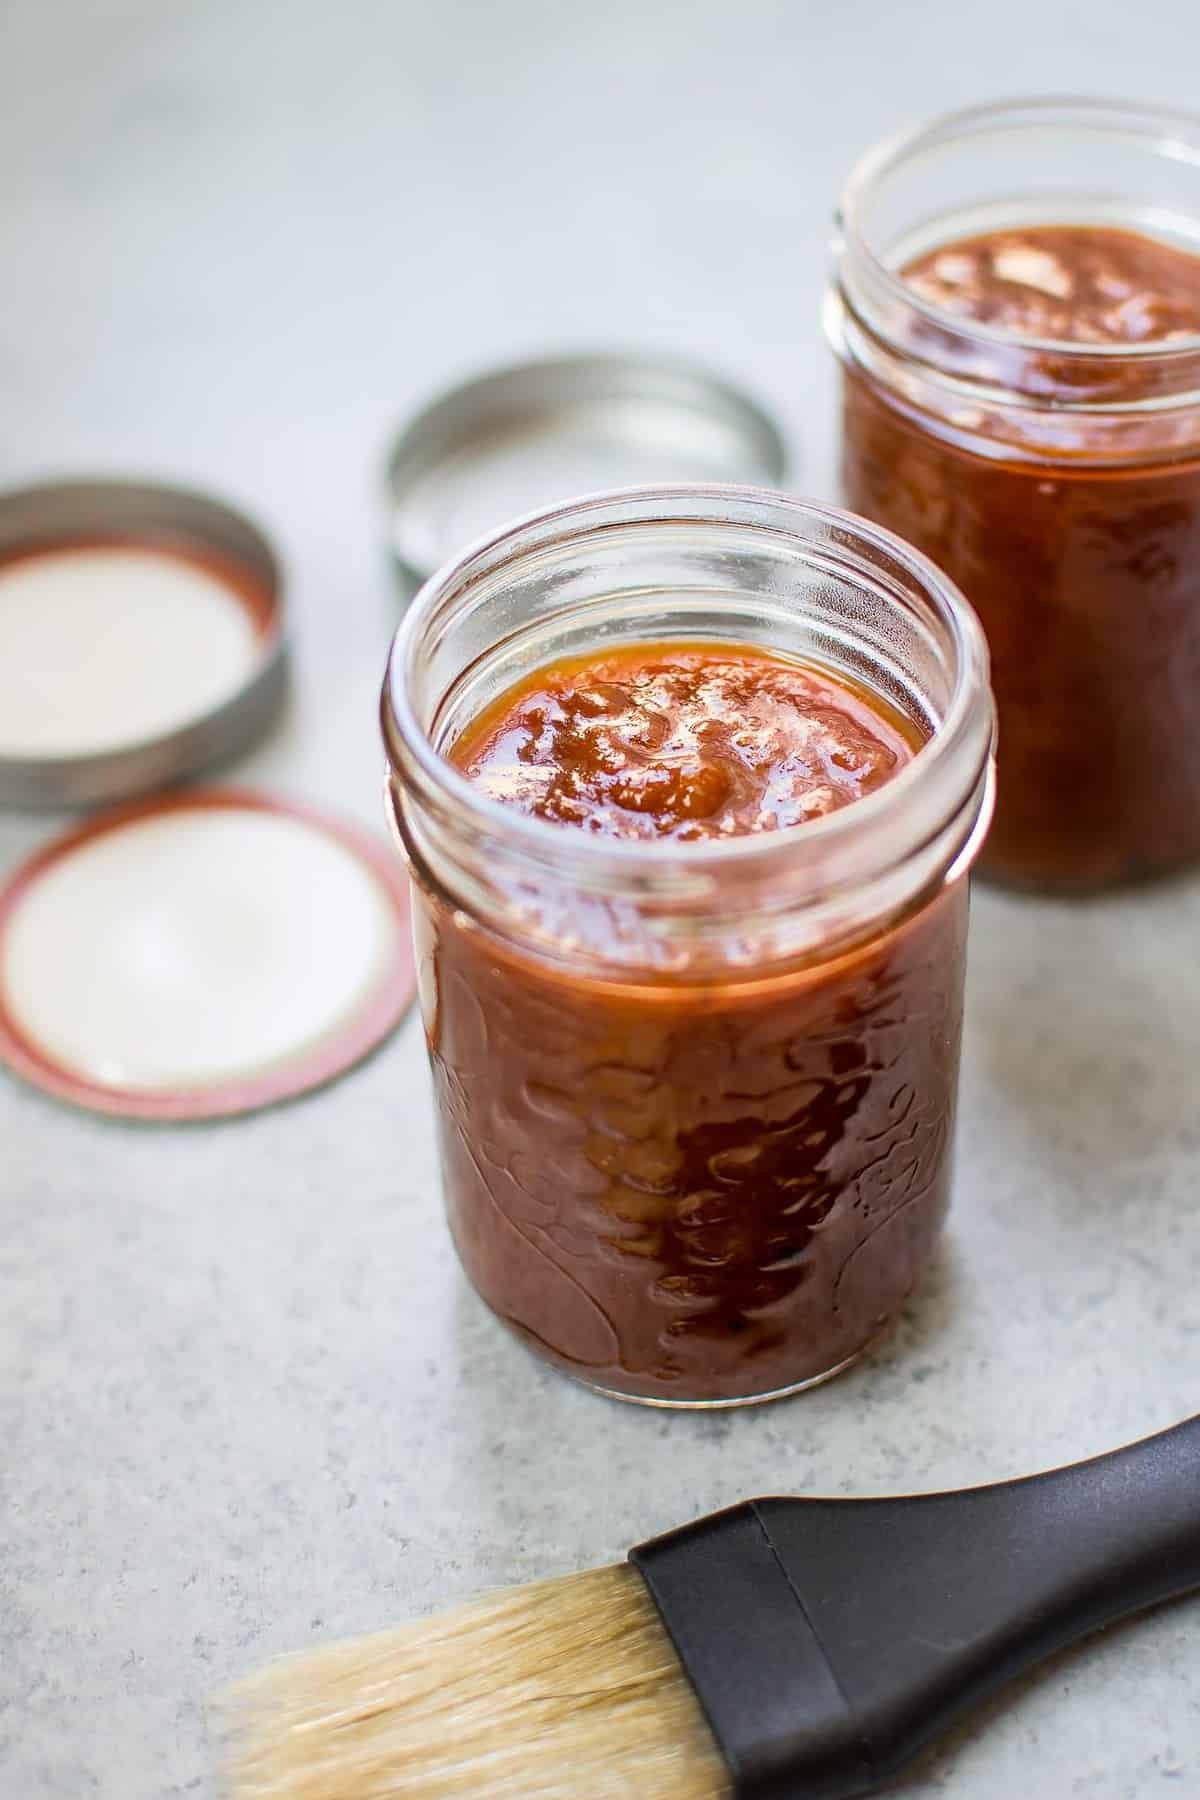  Slather on this tangy and sweet apricot BBQ sauce for a deliciously juicy meat dish